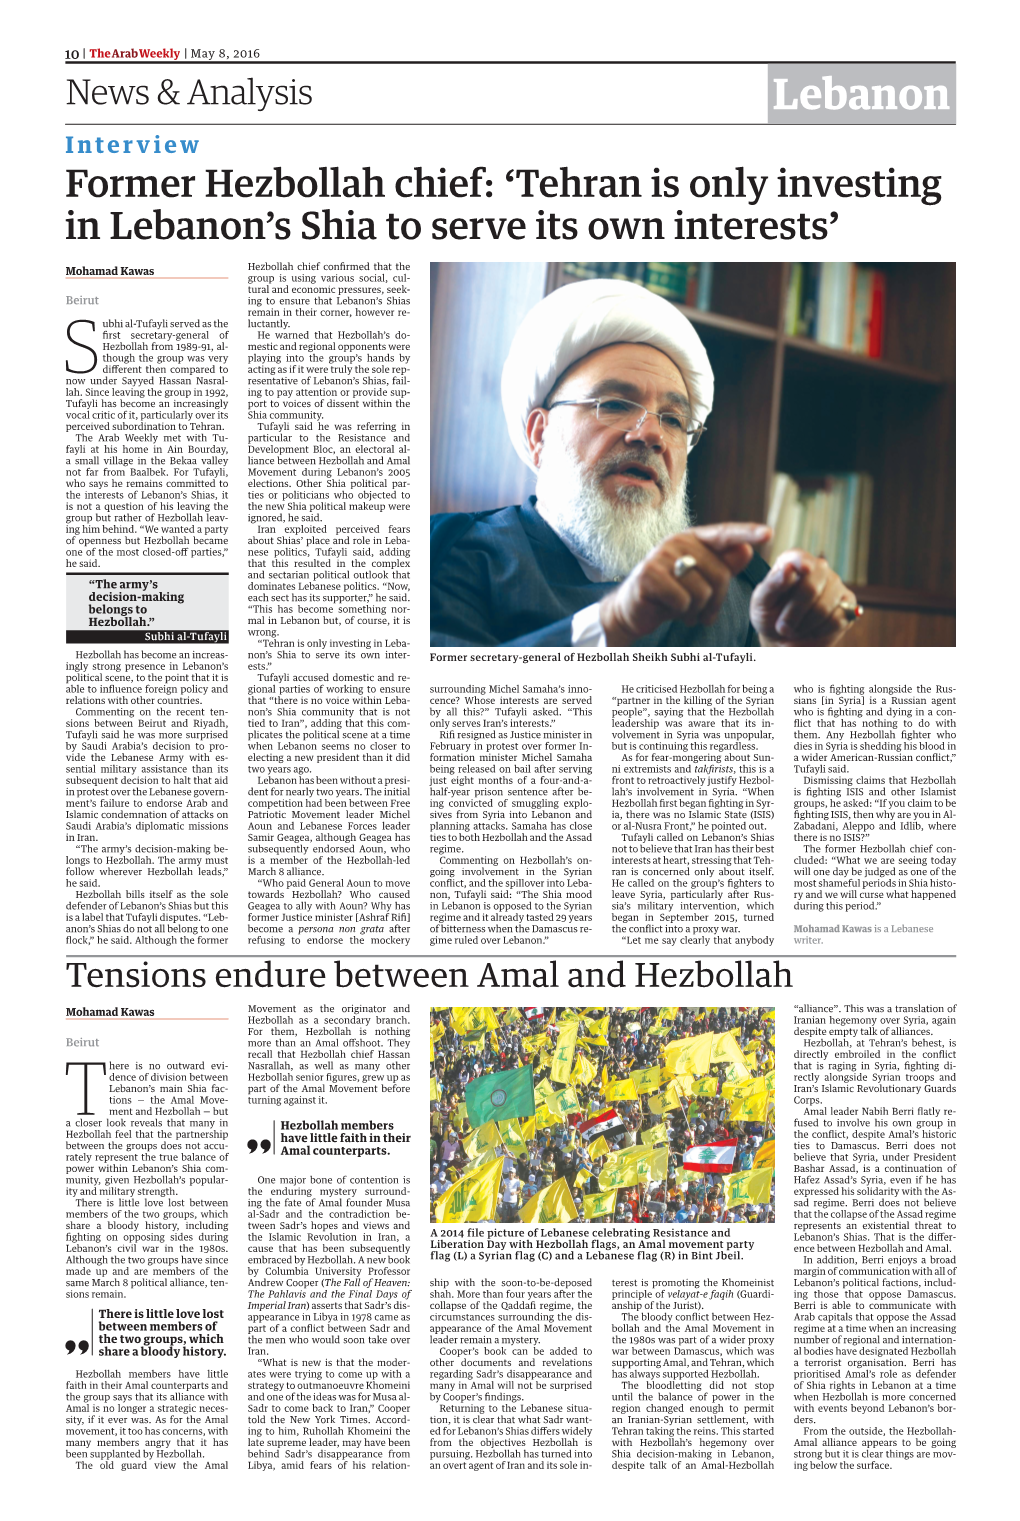 Lebanon Interview Former Hezbollah Chief: ‘Tehran Is Only Investing in Lebanon’S Shia to Serve Its Own Interests’